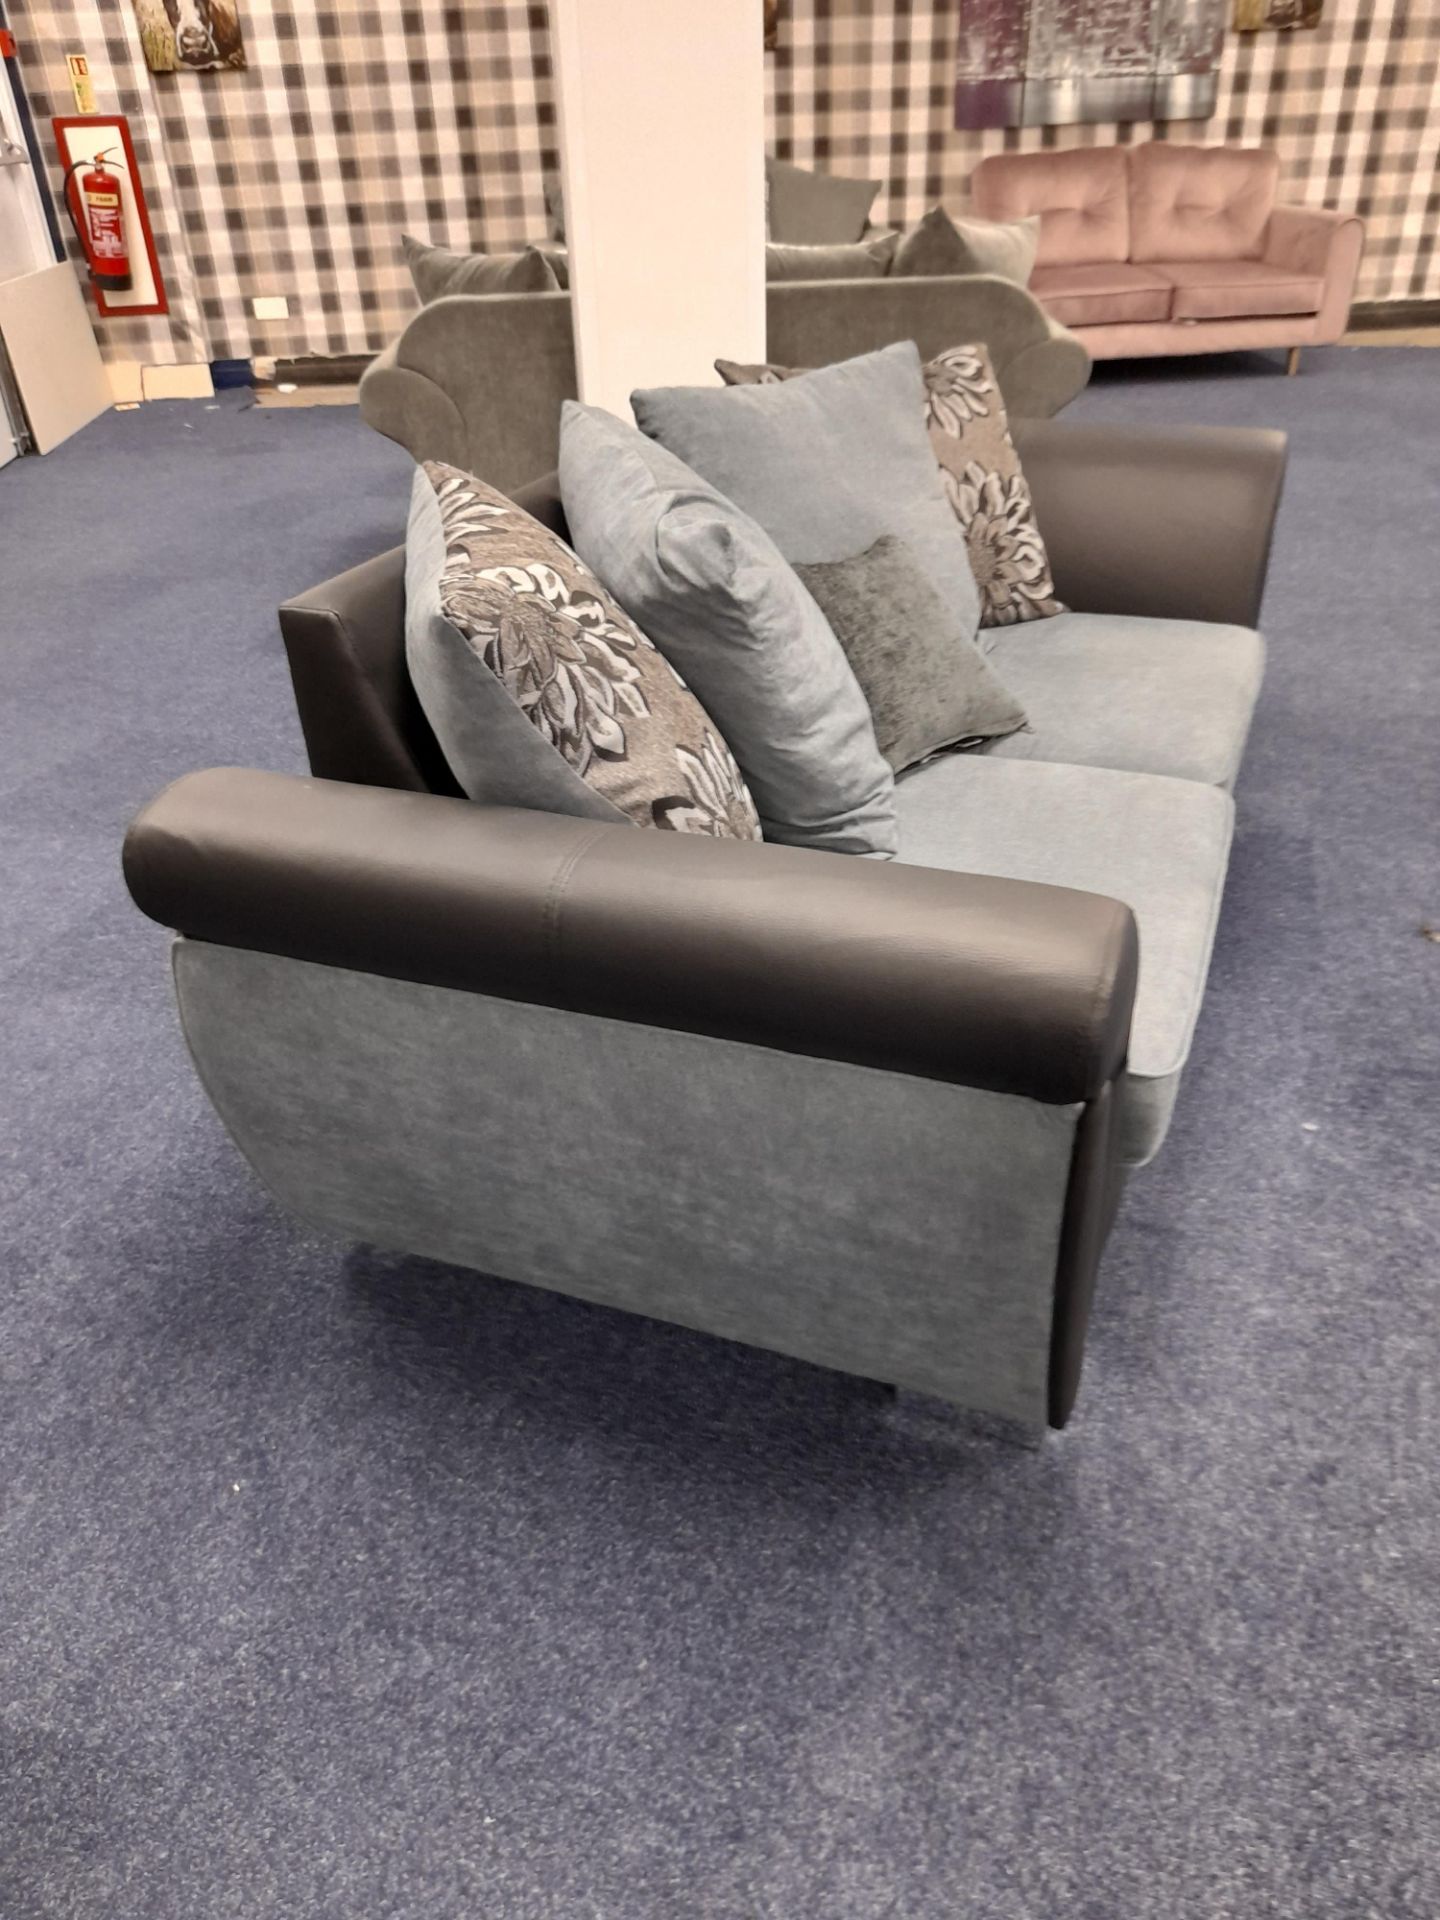 Black Leather/ blue-grey fabric upholstered, 3 seater, scatter cushioned back sofa (Ex-Display) - Image 7 of 7